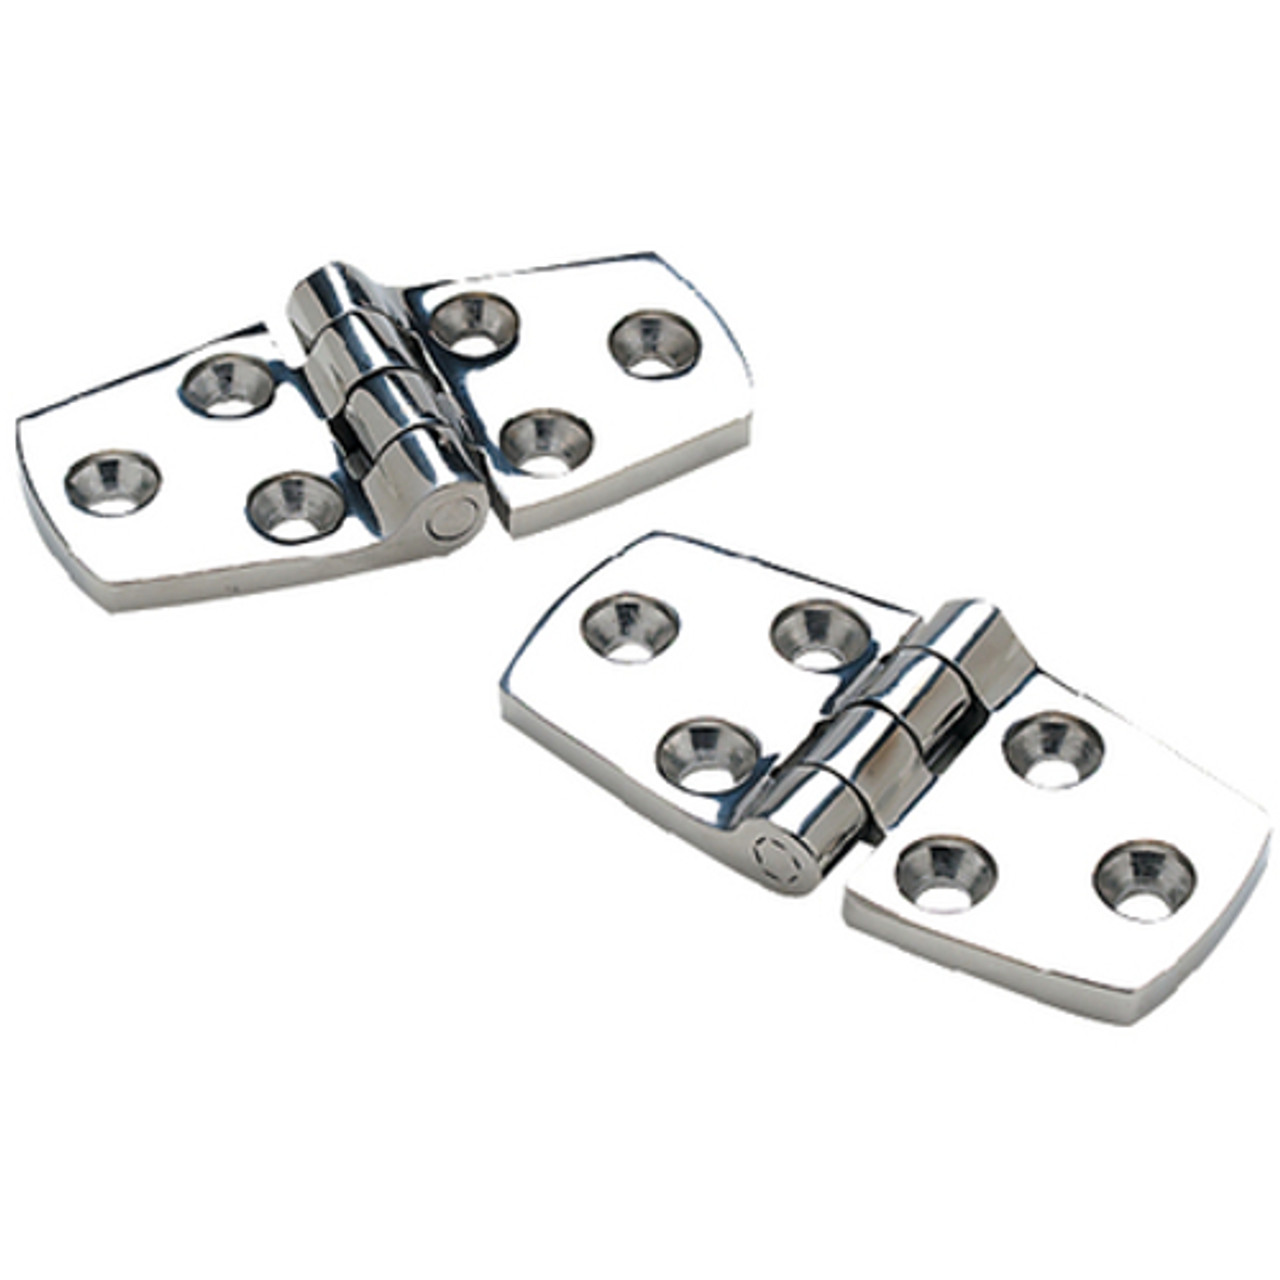 2 Pack of 3 x 1-1/2 Inch 316 Stainless Steel Door or Utility Hinges for Boats